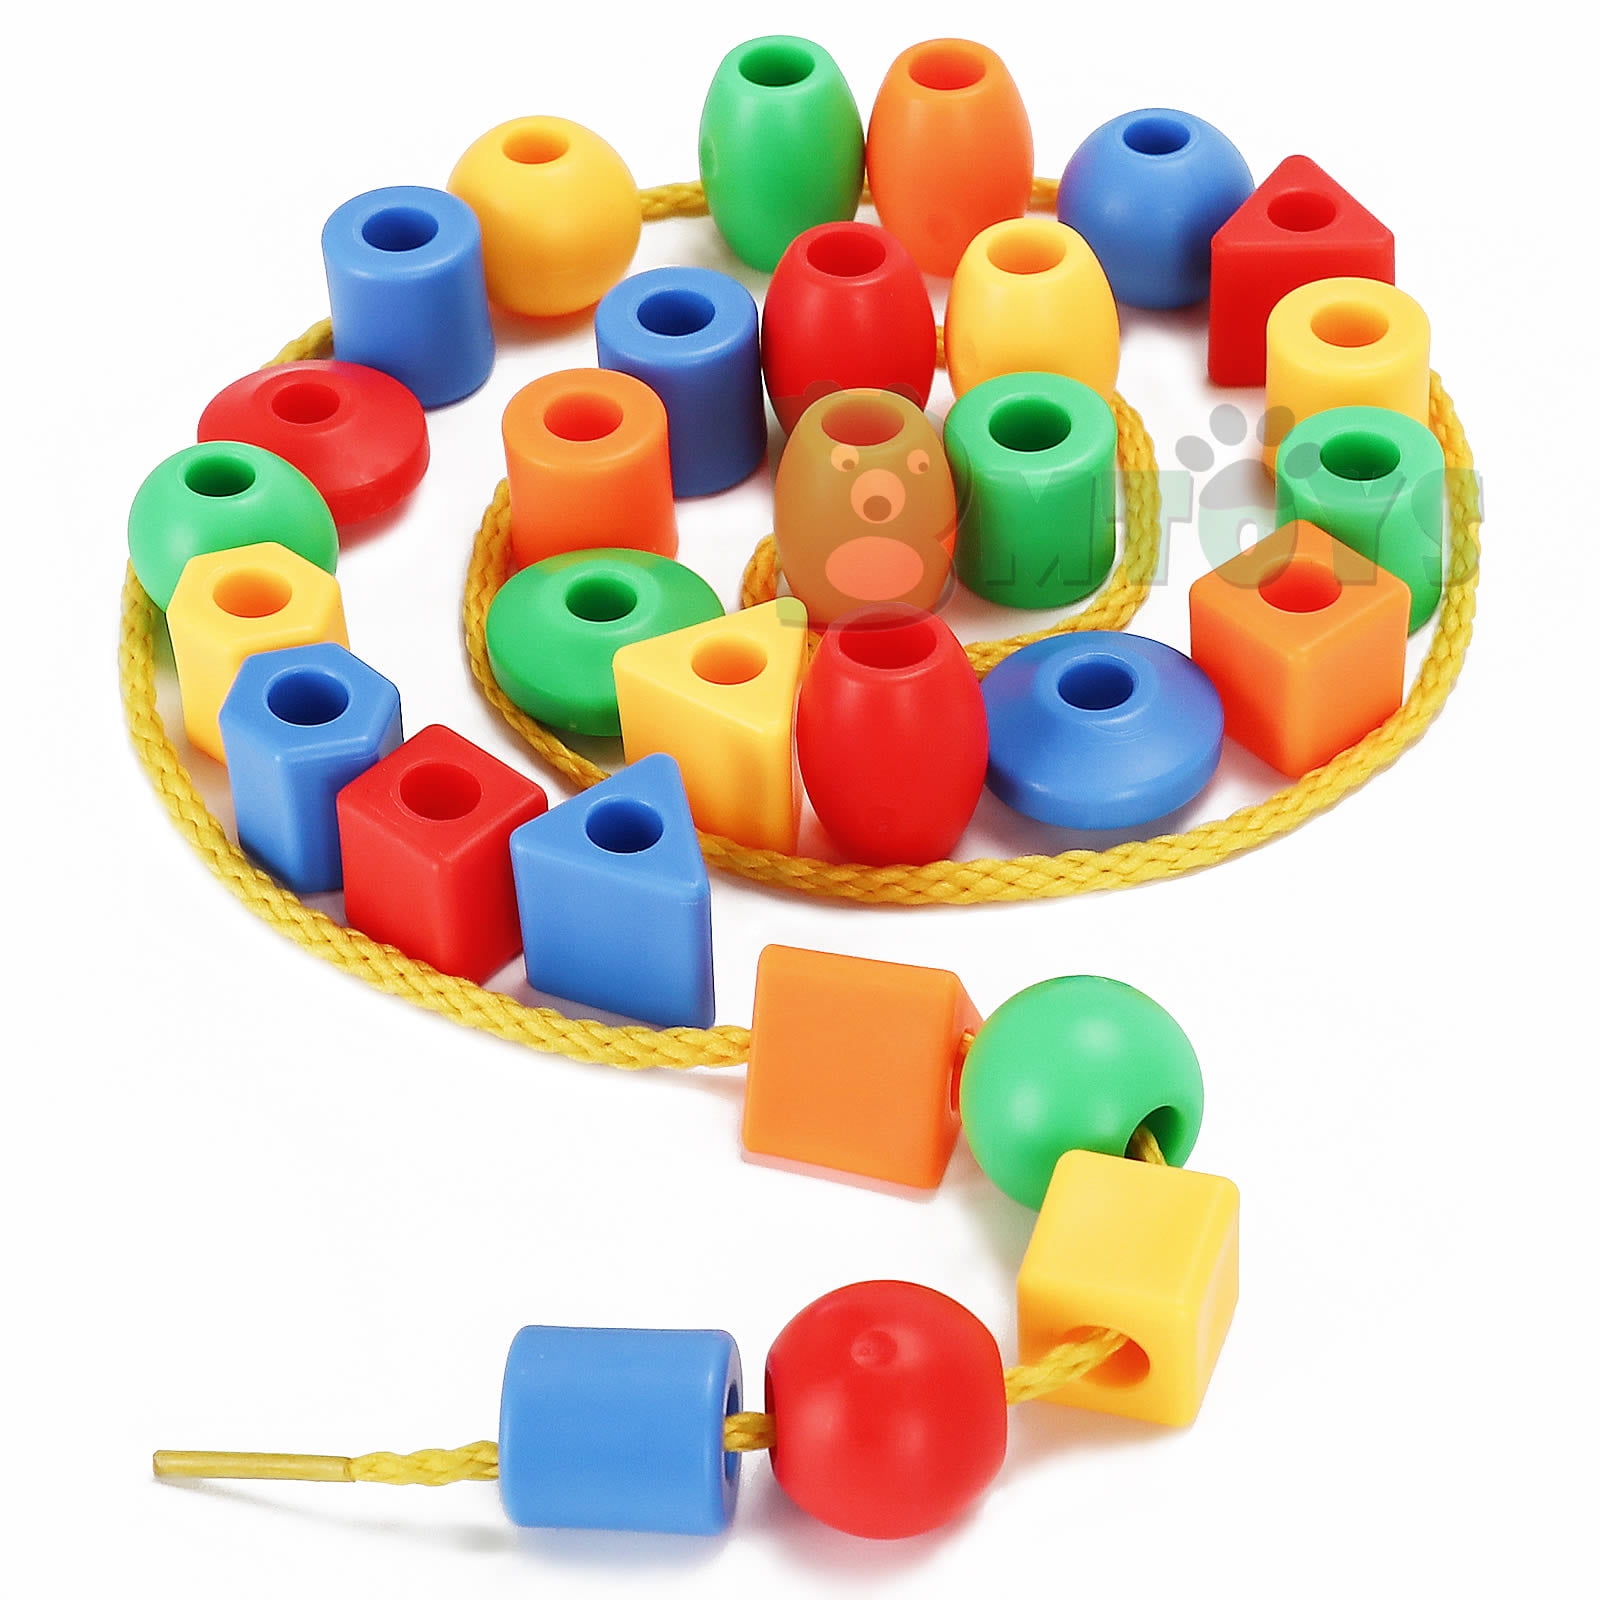 Preschool Lacing Beads for Kids - 70 Stringing Beads with 4 Strings